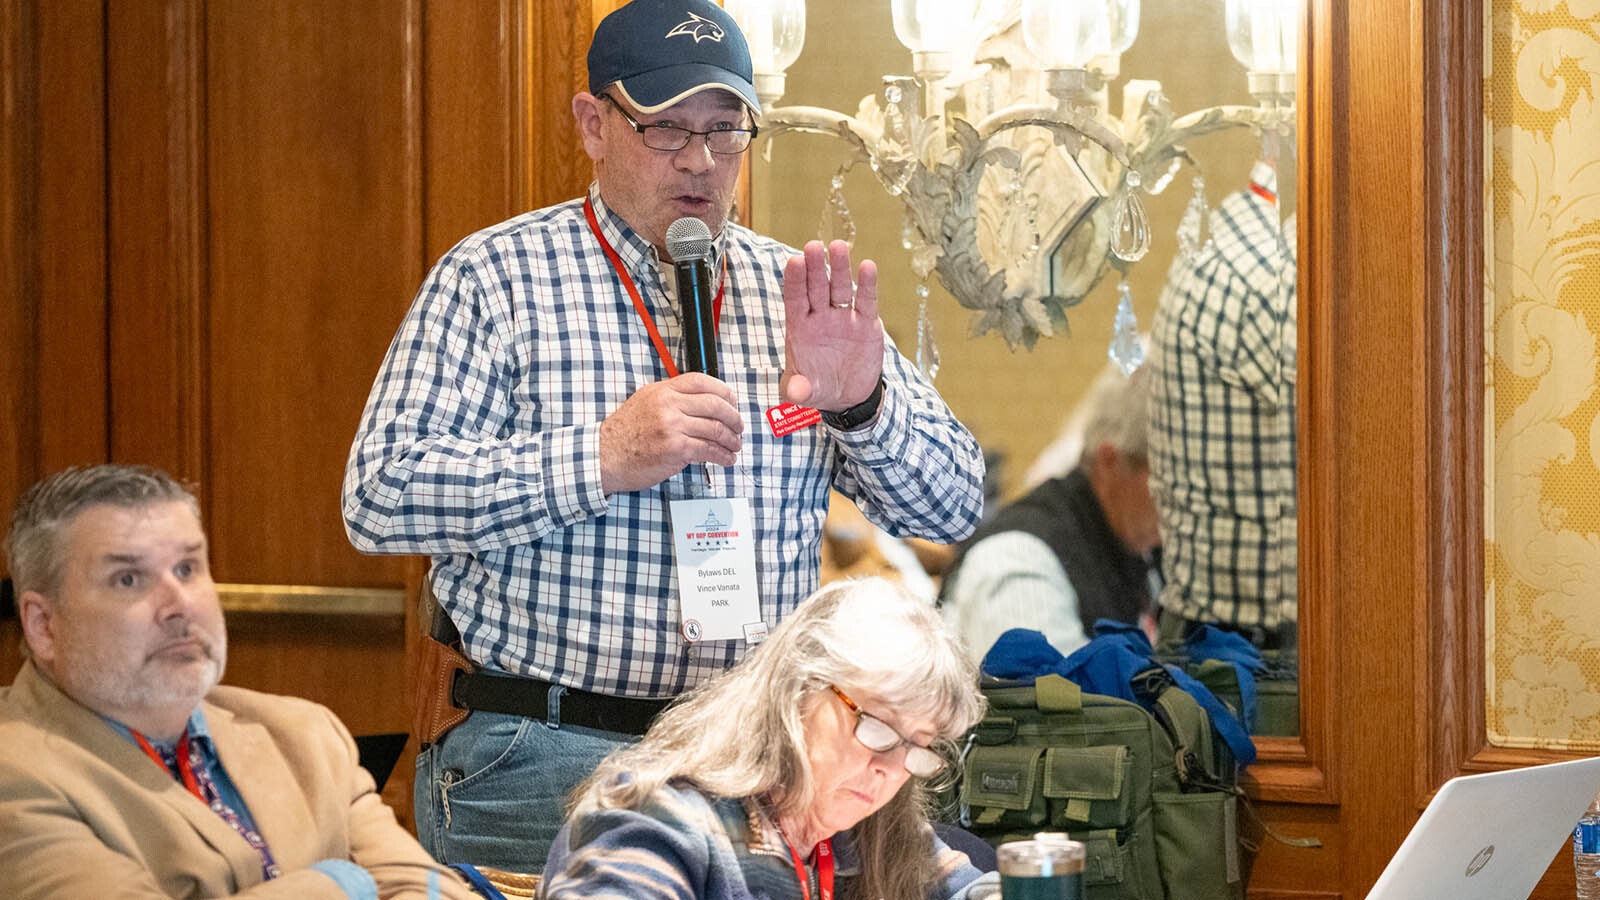 Vince Vanata from Park County speaks at the Bylaws Committee of the Wyoming Republican Party meets at Little America in Cheyenne on Thursday.